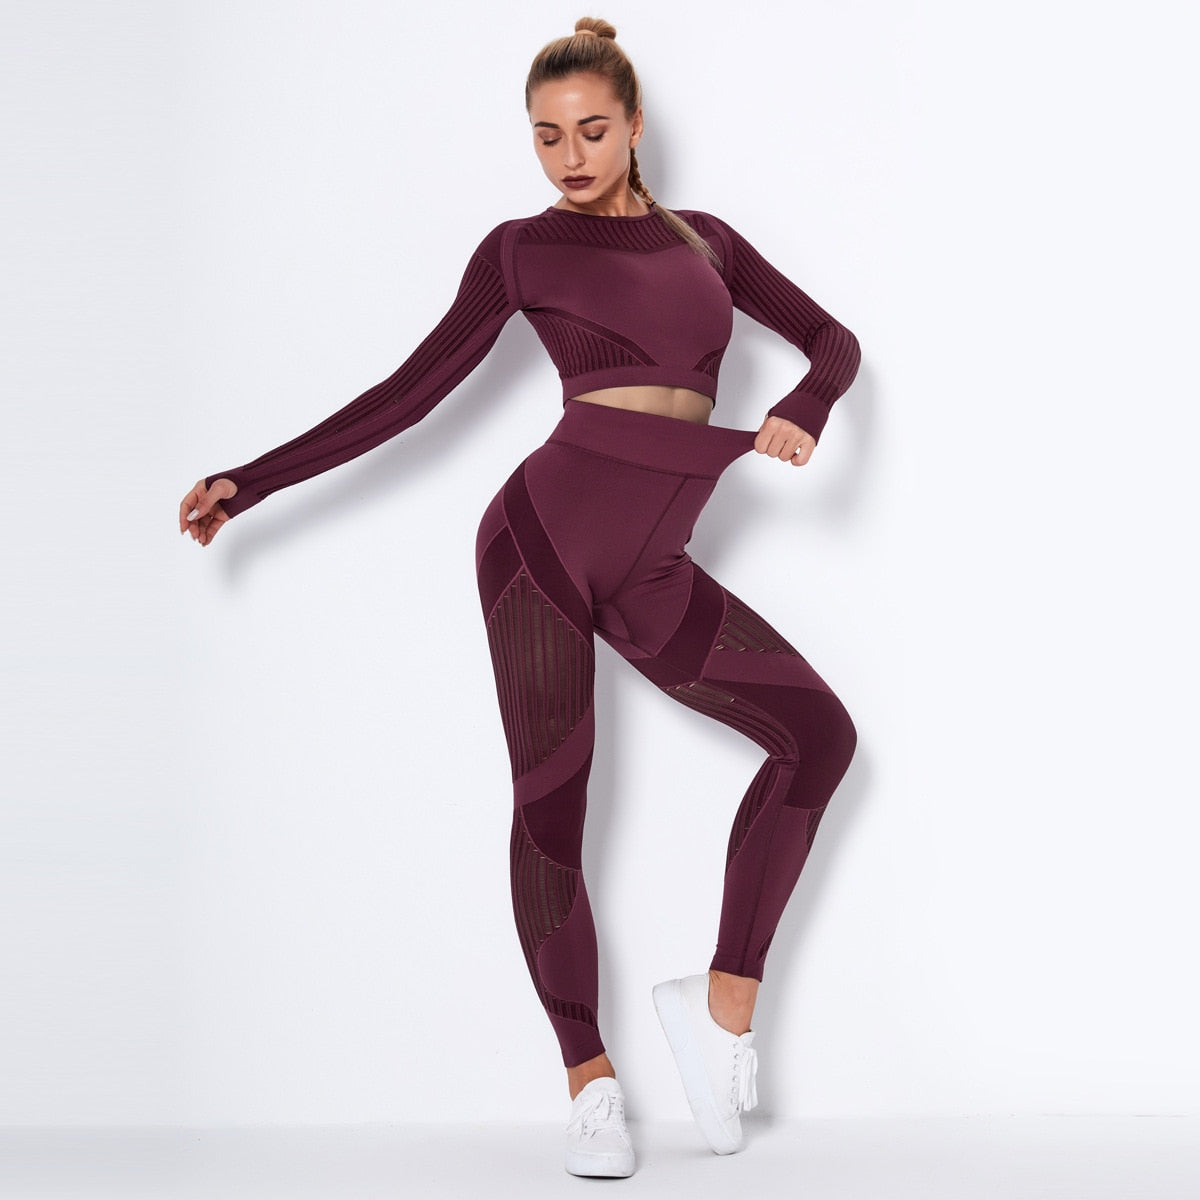 Workout Sets For Women 2 Piece Seamless Yoga Outfit Tracksuit High Waisted Yoga Leggings And Crop Top Gym Clothes Set